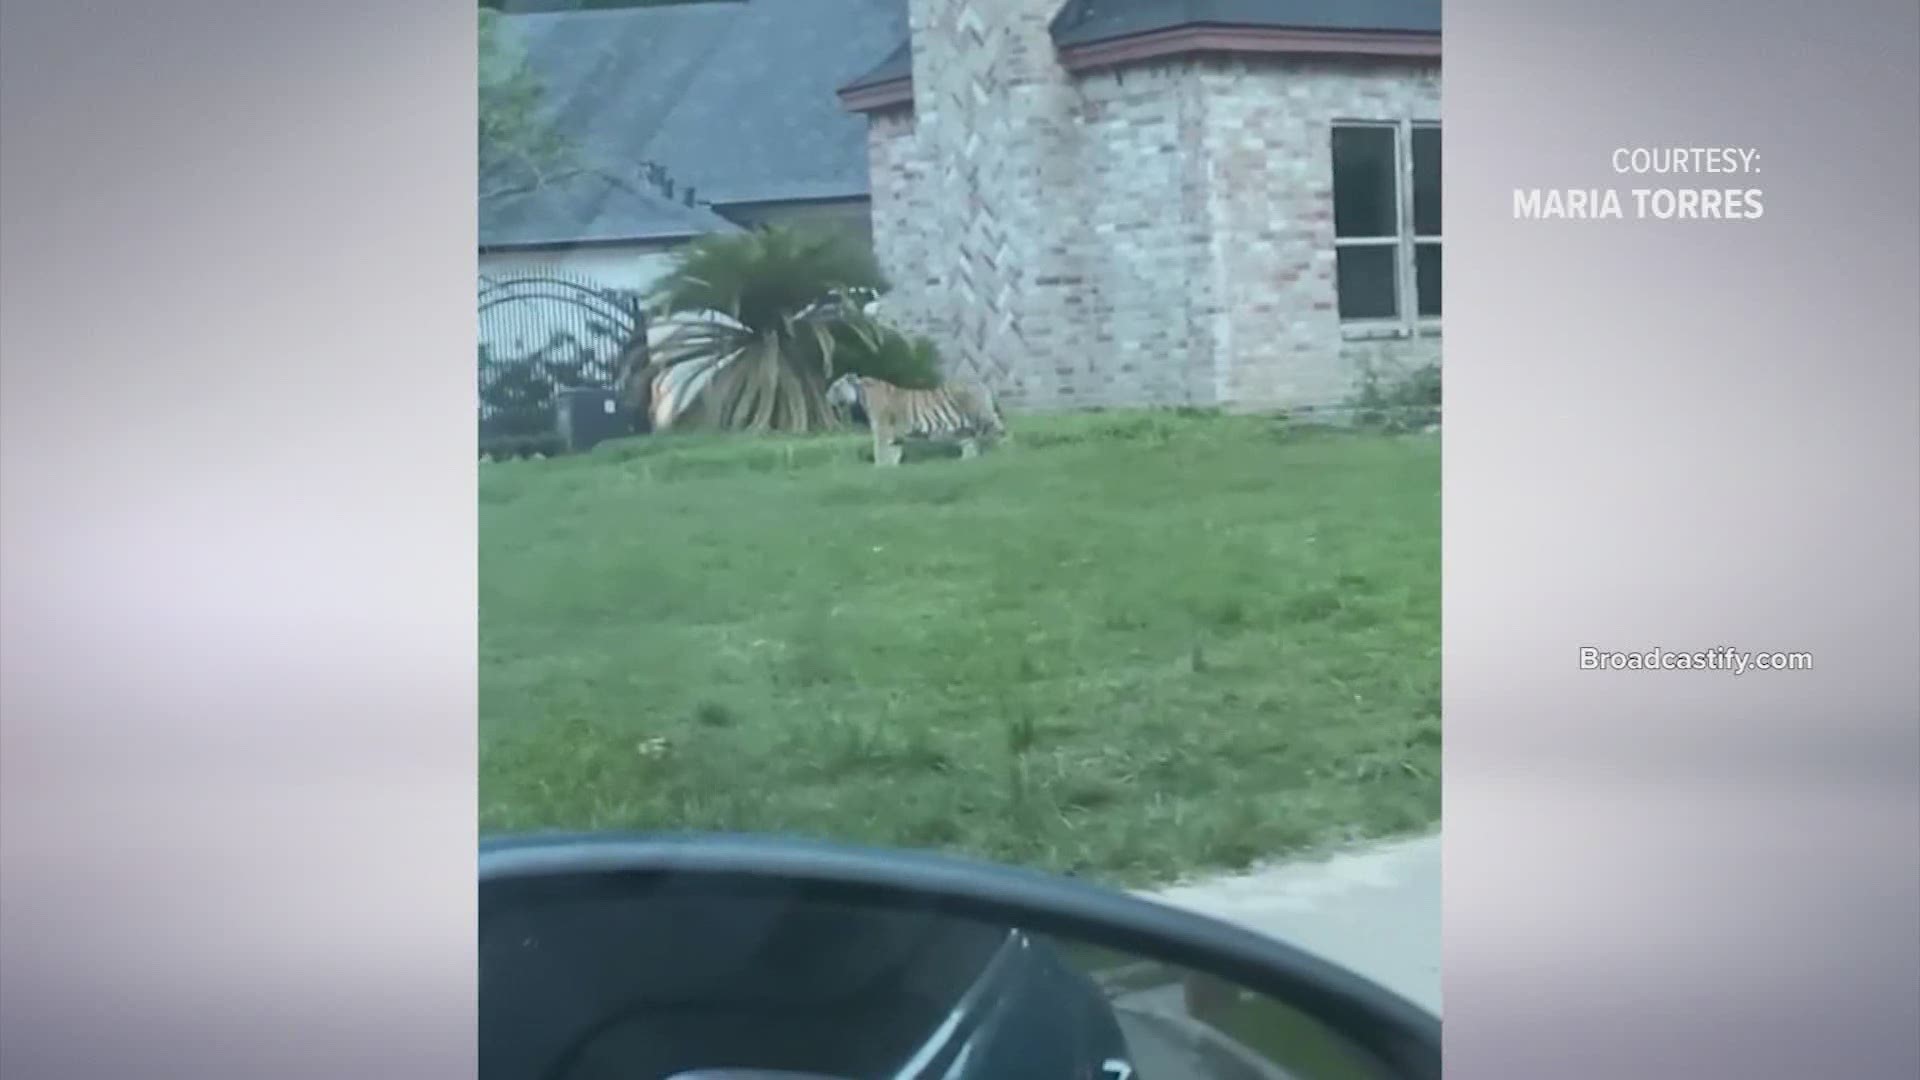 KHOU 11 has the latest on a tiger that was walking in the yard of a Memorial home. Broadcastify.com captured police audio.